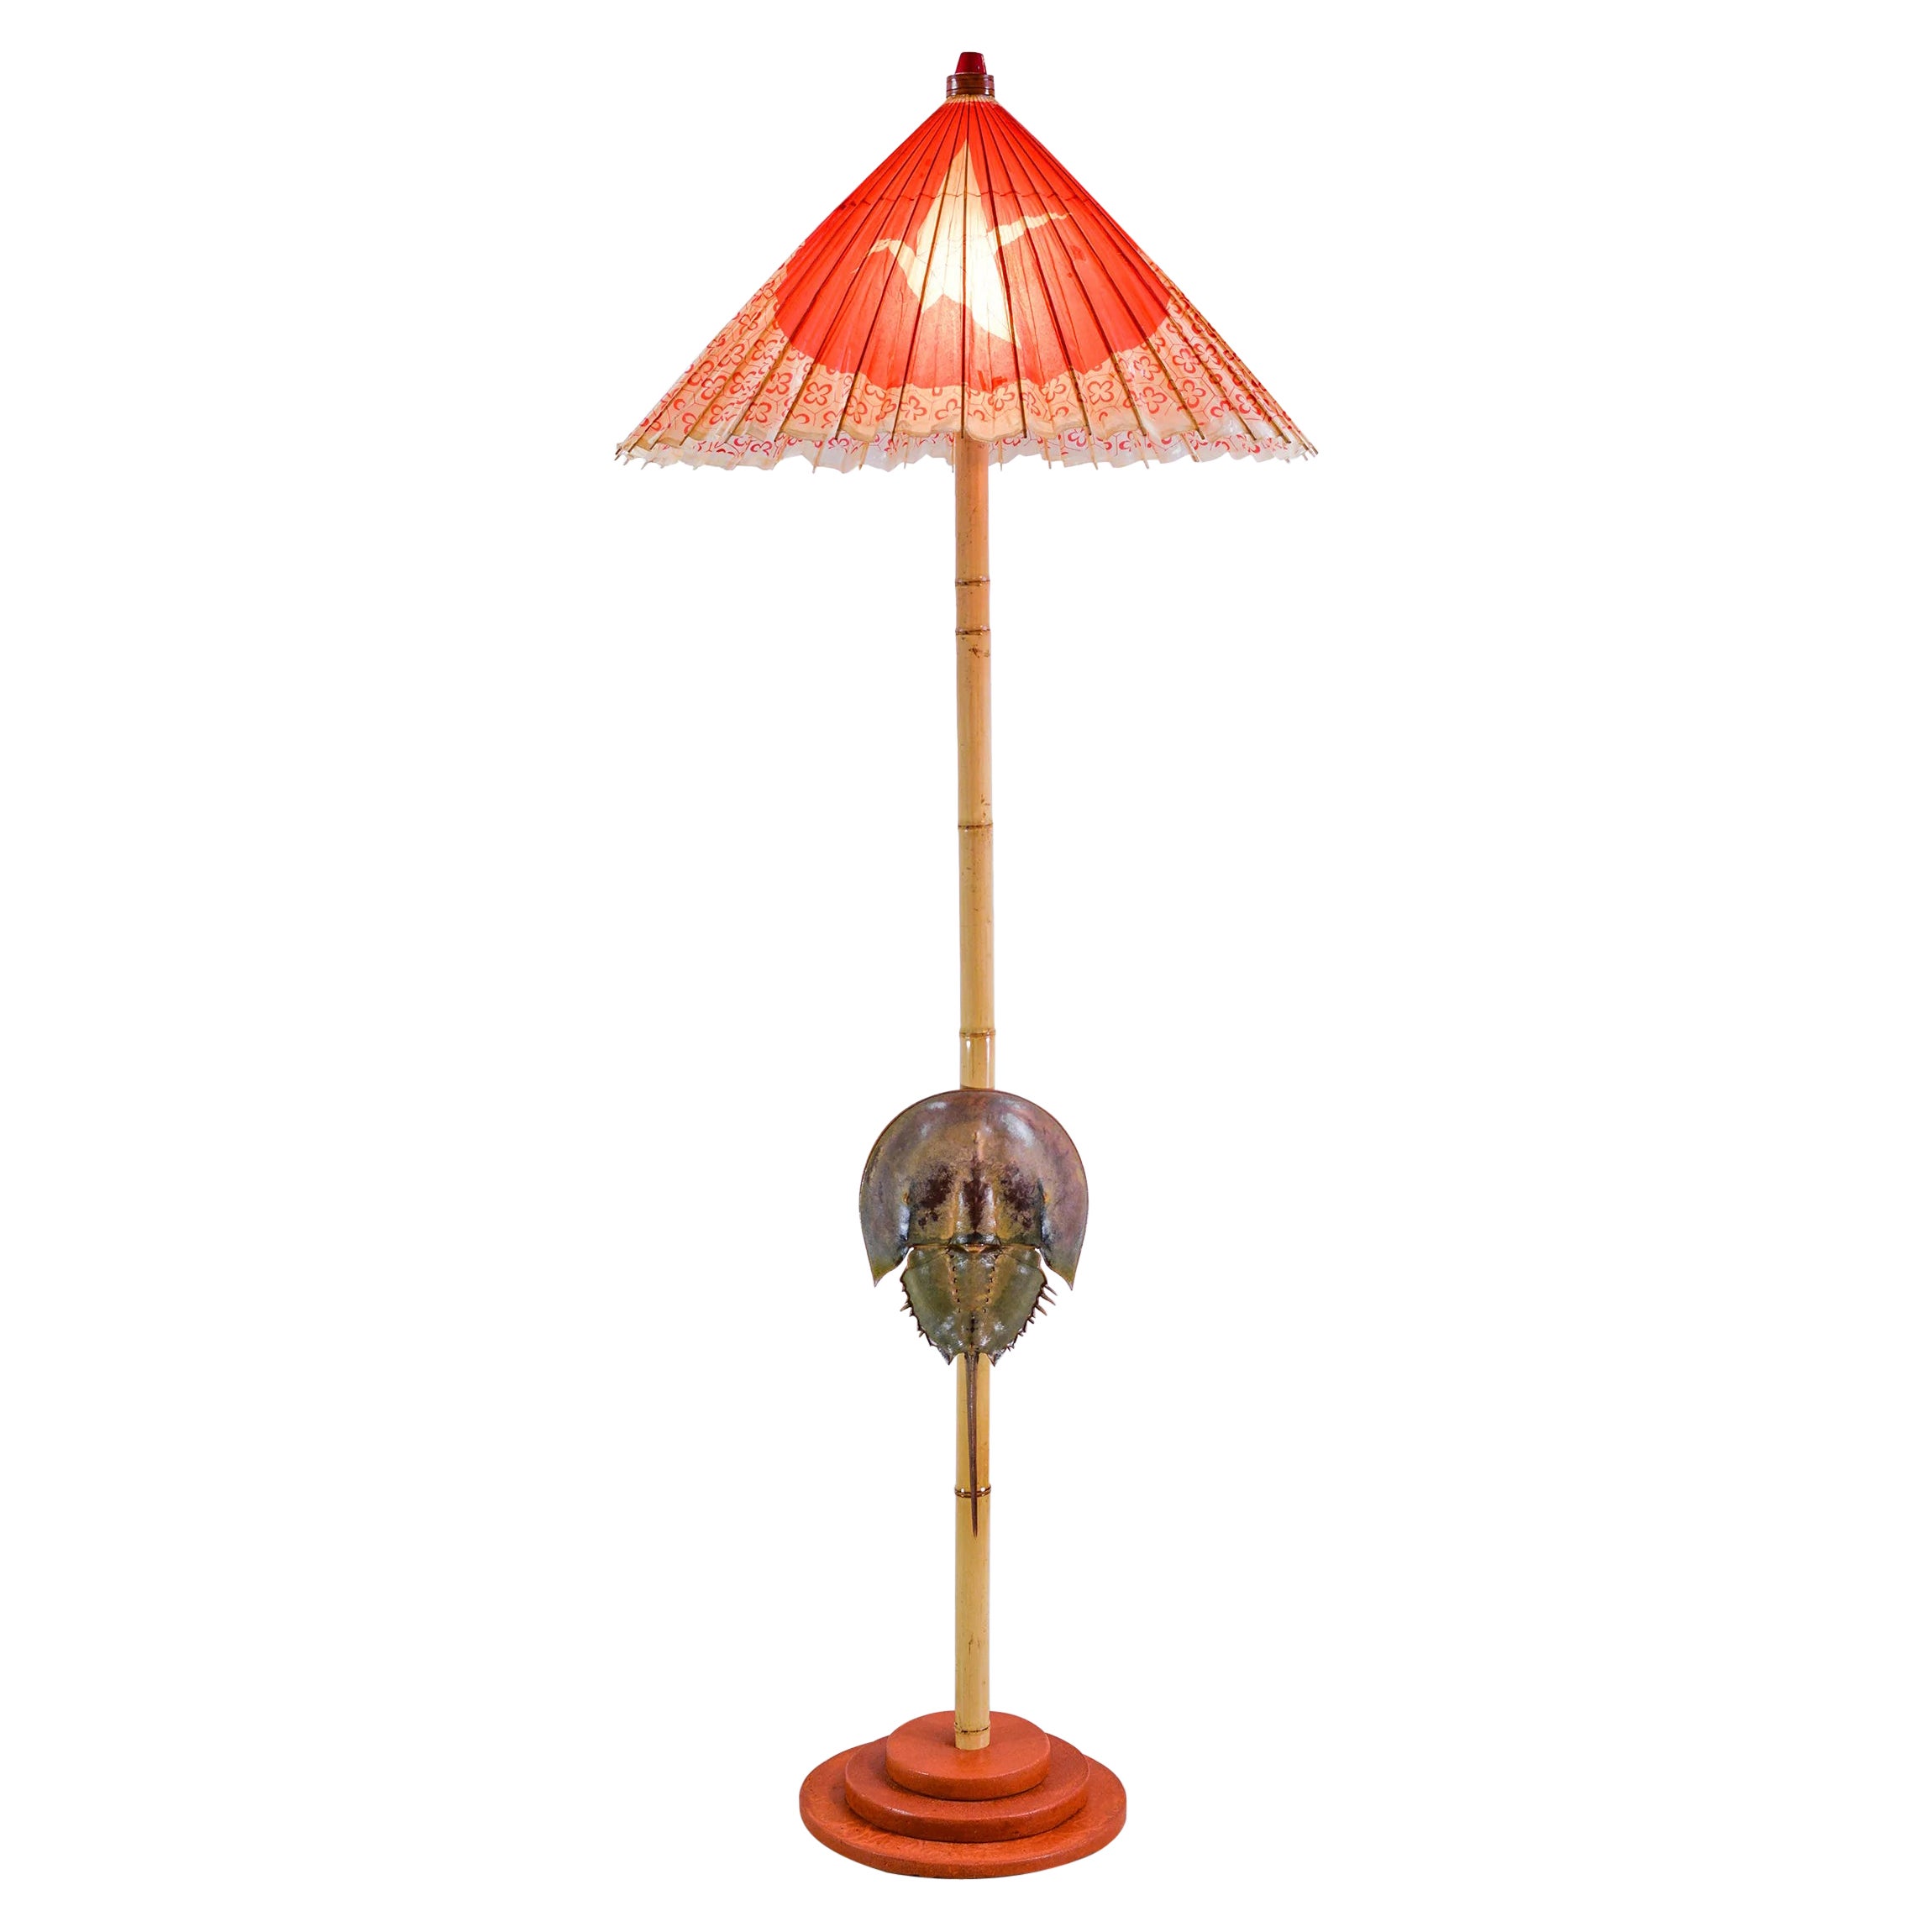 Jumbo Horseshoe Crab Lamp with Antique Parasol Shade by Christopher Tennant